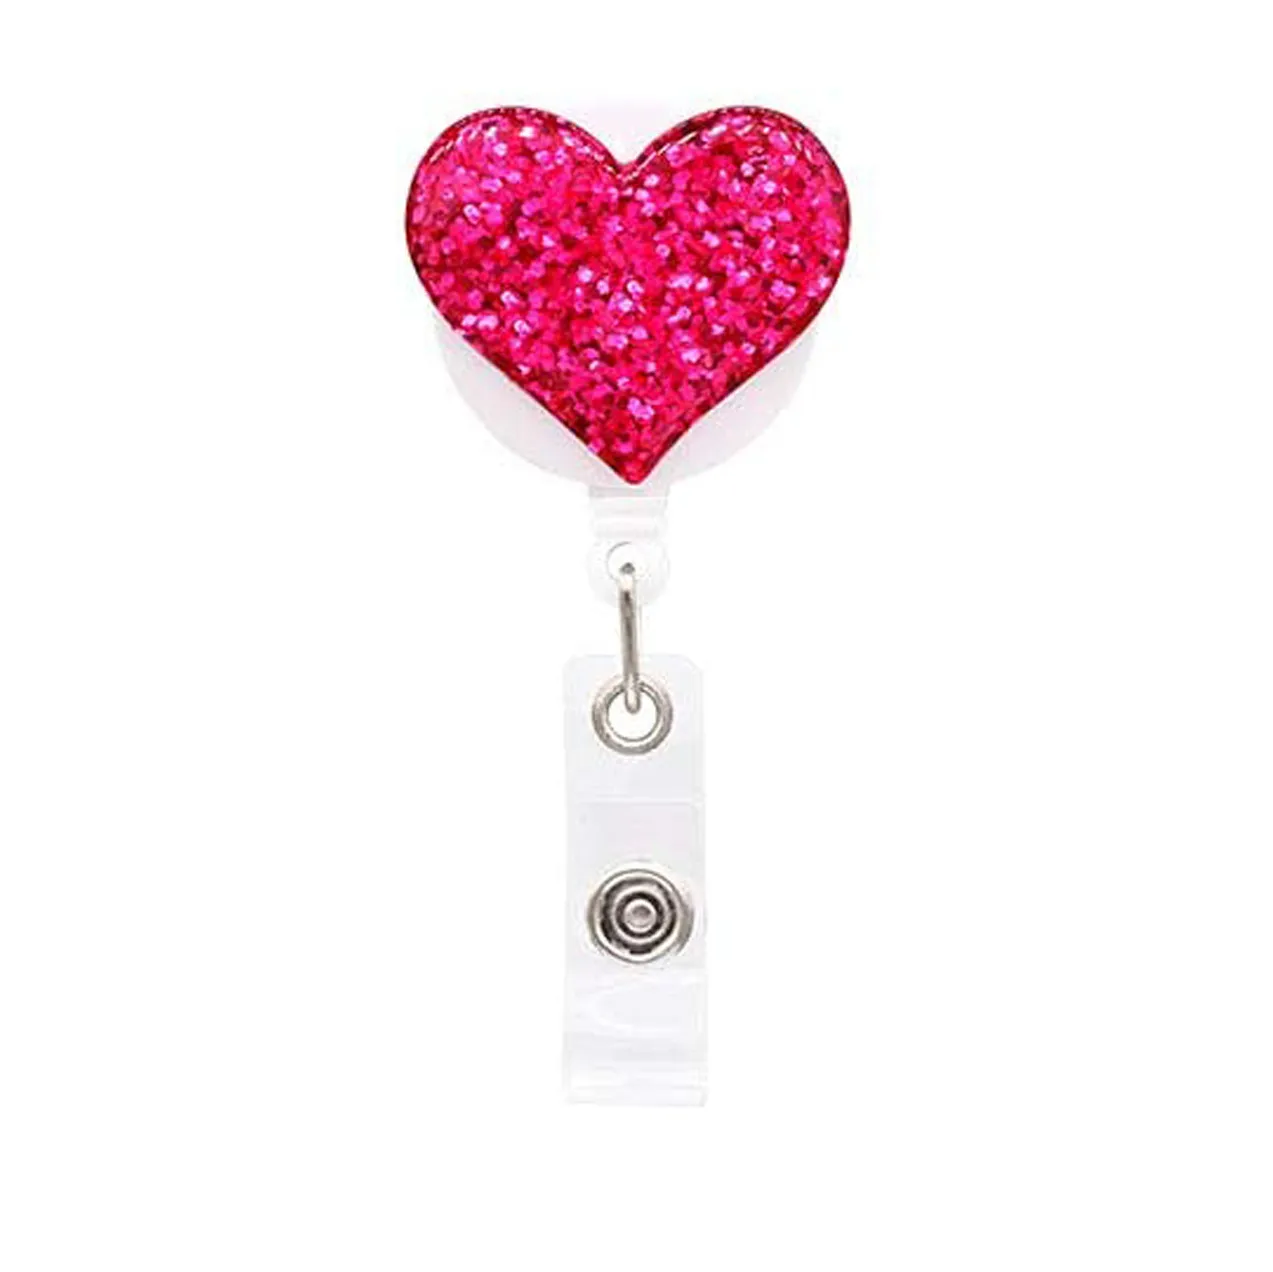 Wholesale 12 Pack Lightweight Heart Retractable Badge Reels With Alligator  Clip 24 Easy Retractioning Cord For Office ID Holder, Glittering Powder  Epoxy Perfect Love Nurse Gift From Lovecompany, $0.51